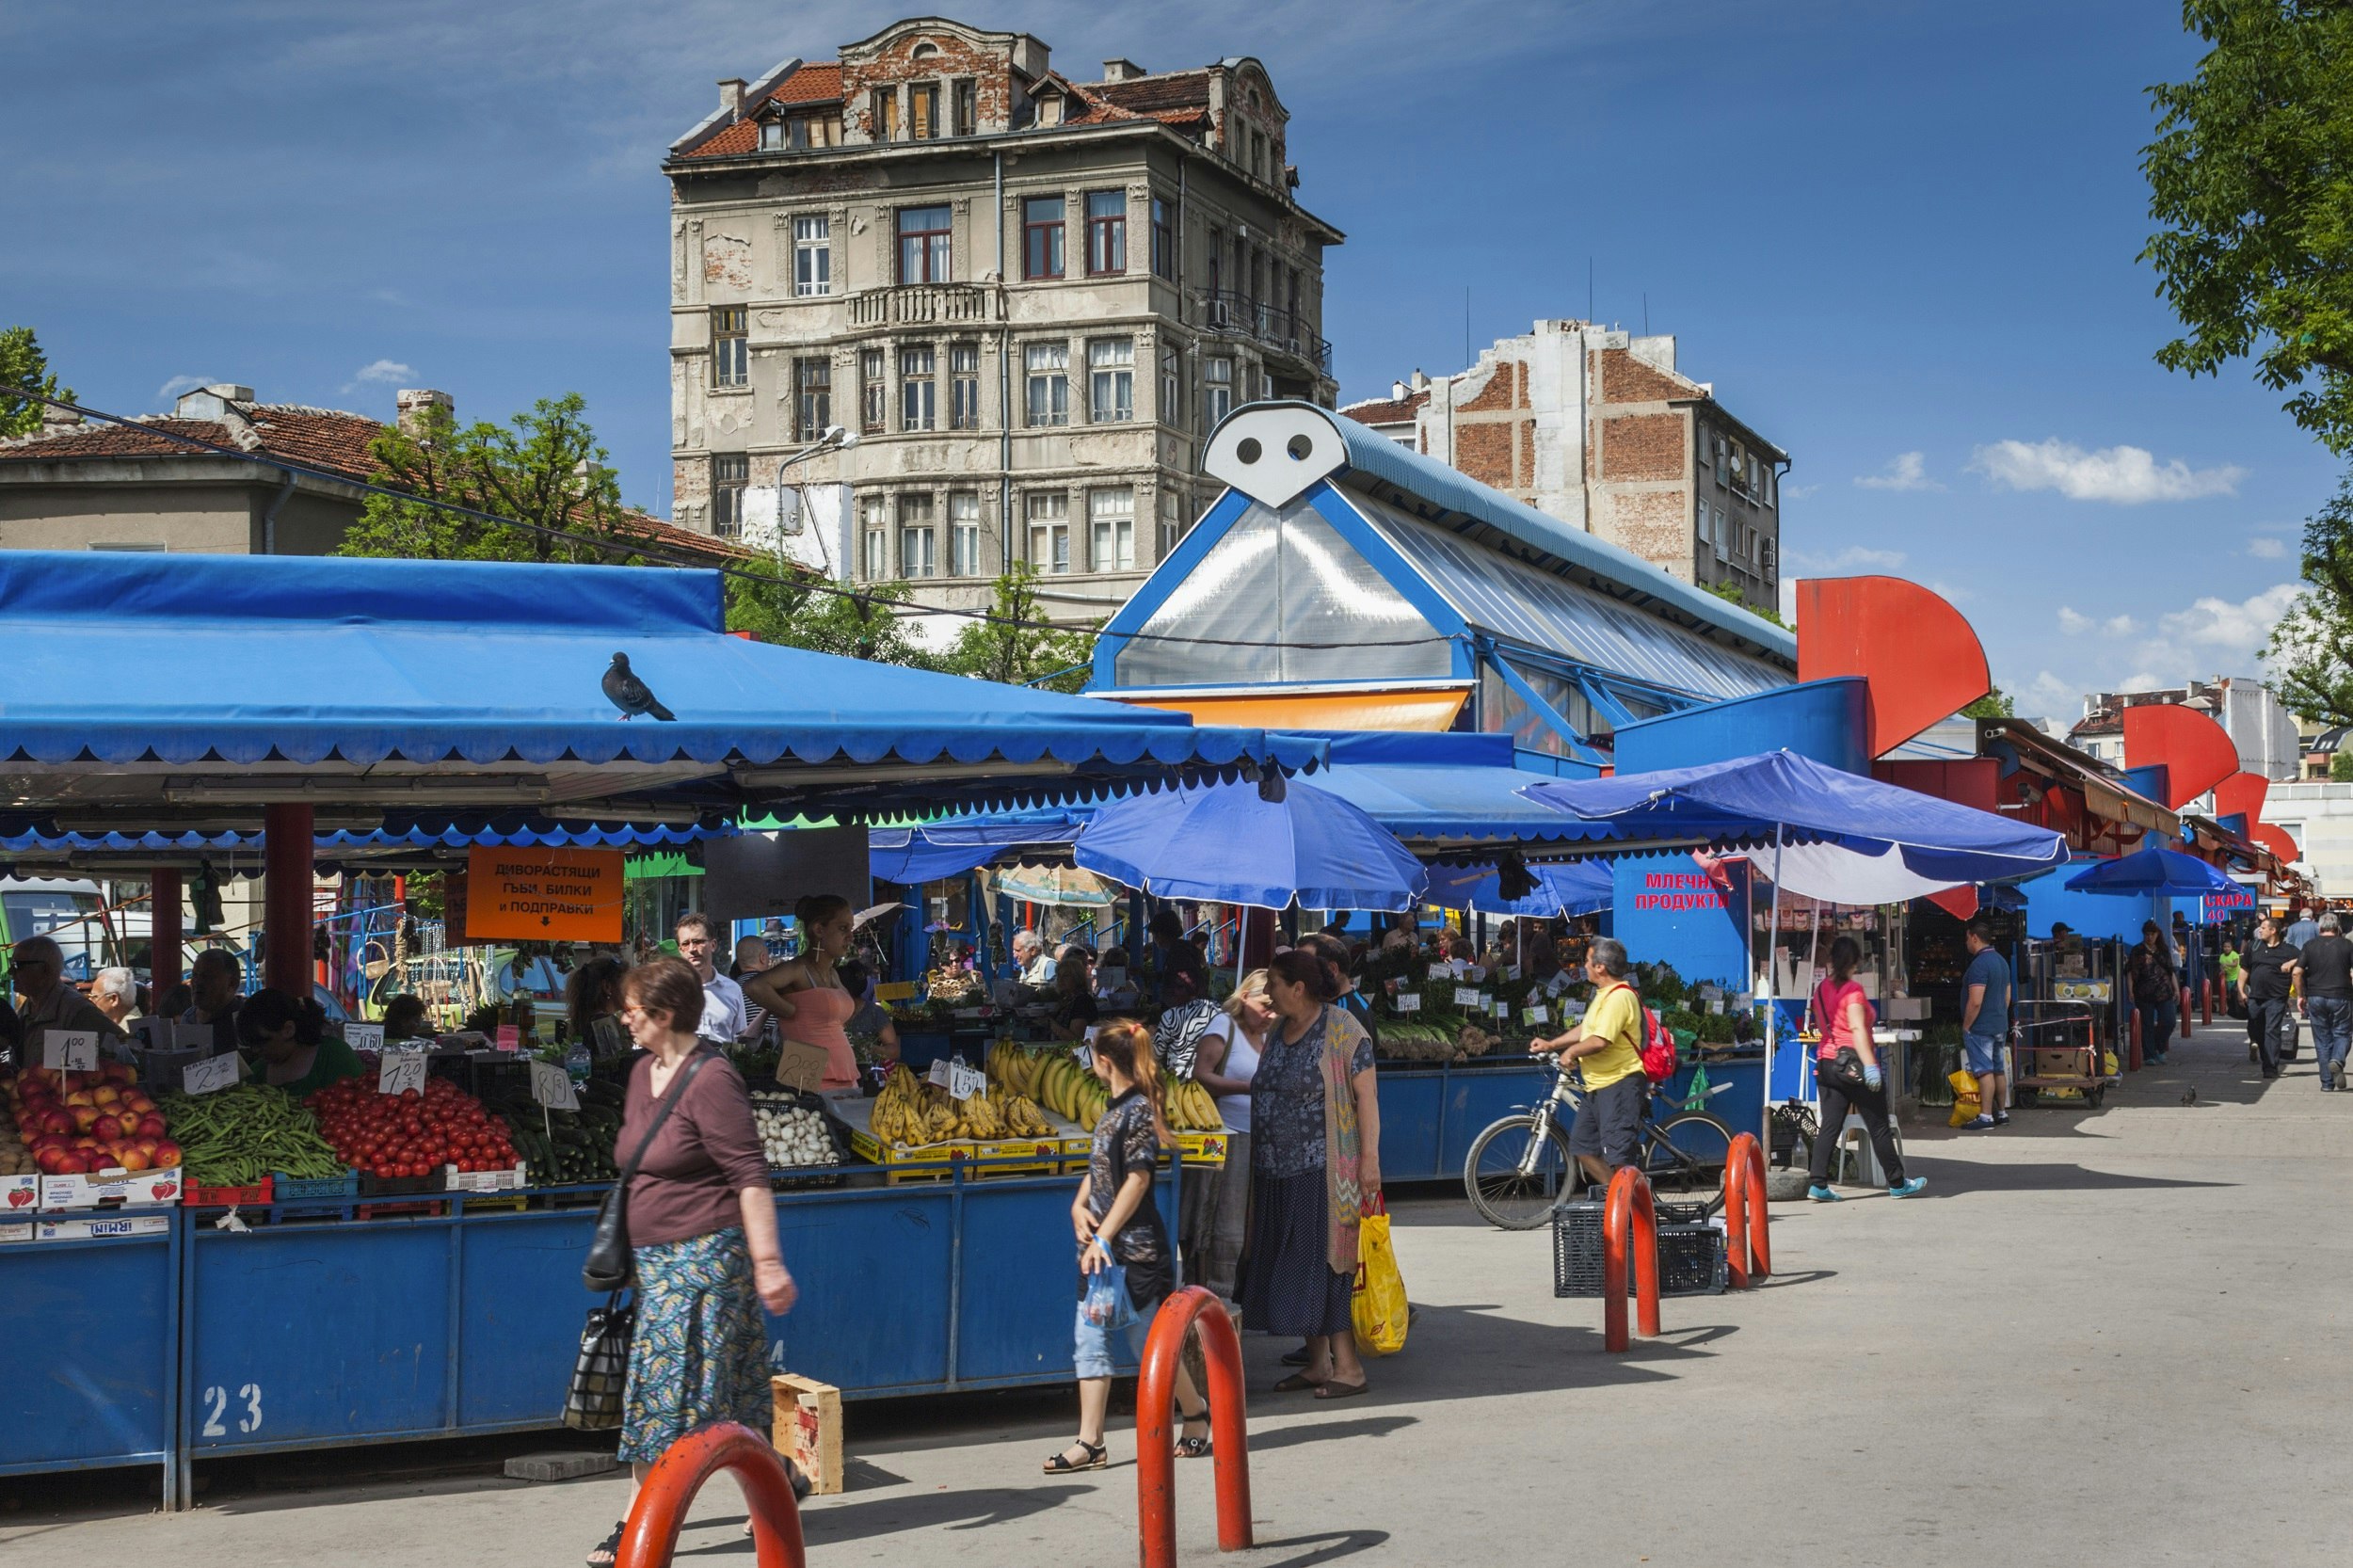 Shoppers stroll by a series of stalls packed with fruits and vegetables under a bright blue canopy